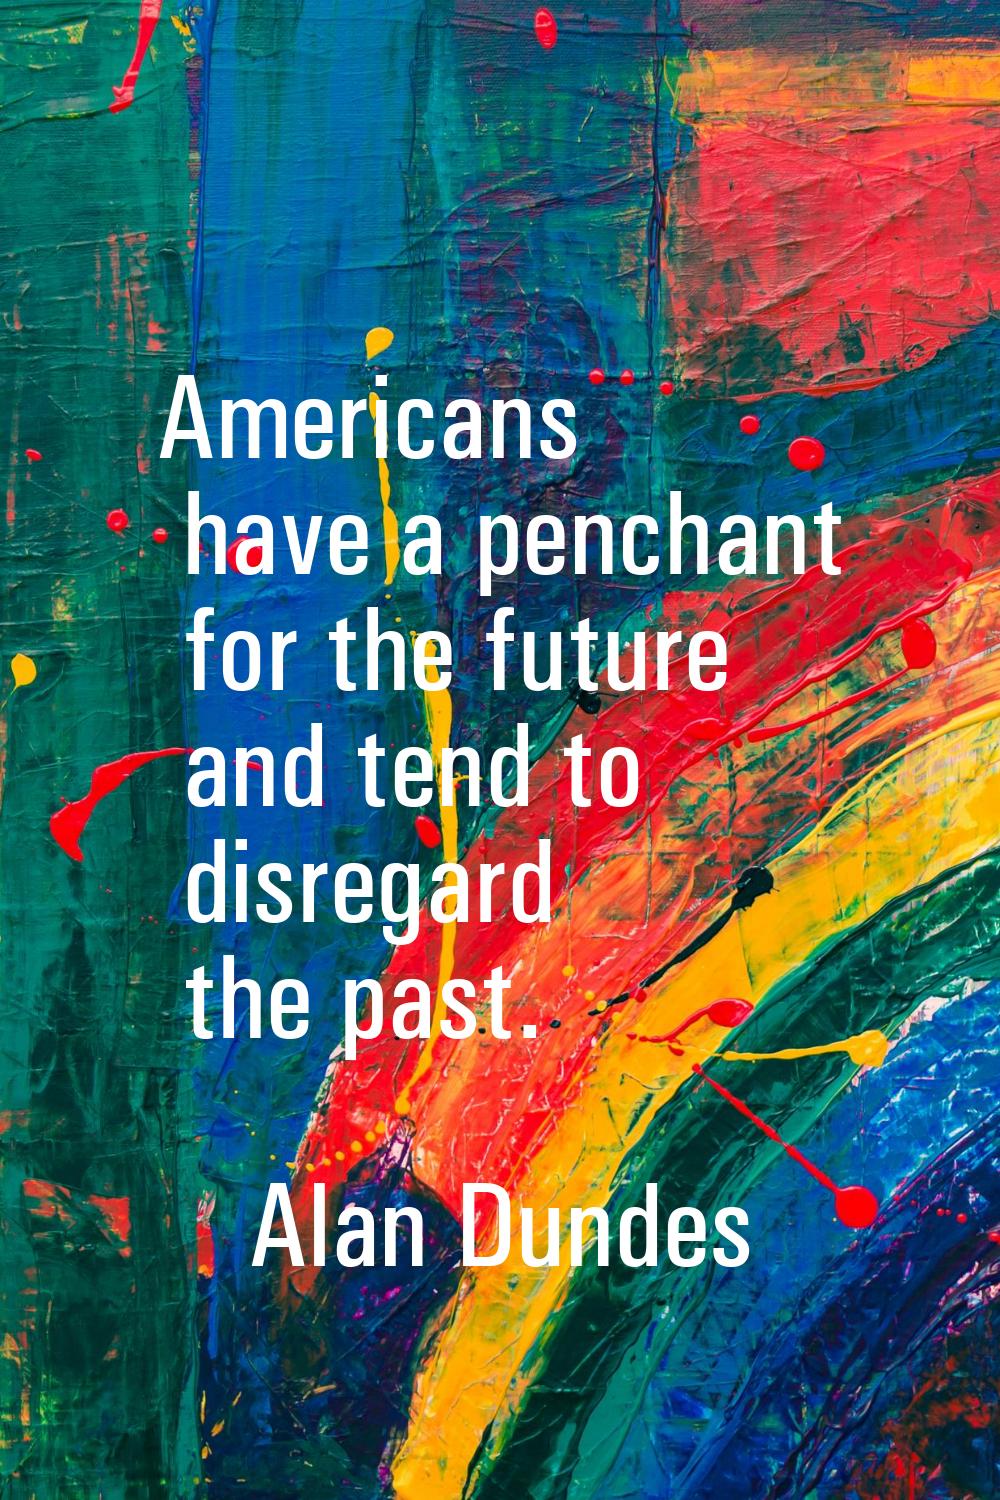 Americans have a penchant for the future and tend to disregard the past.